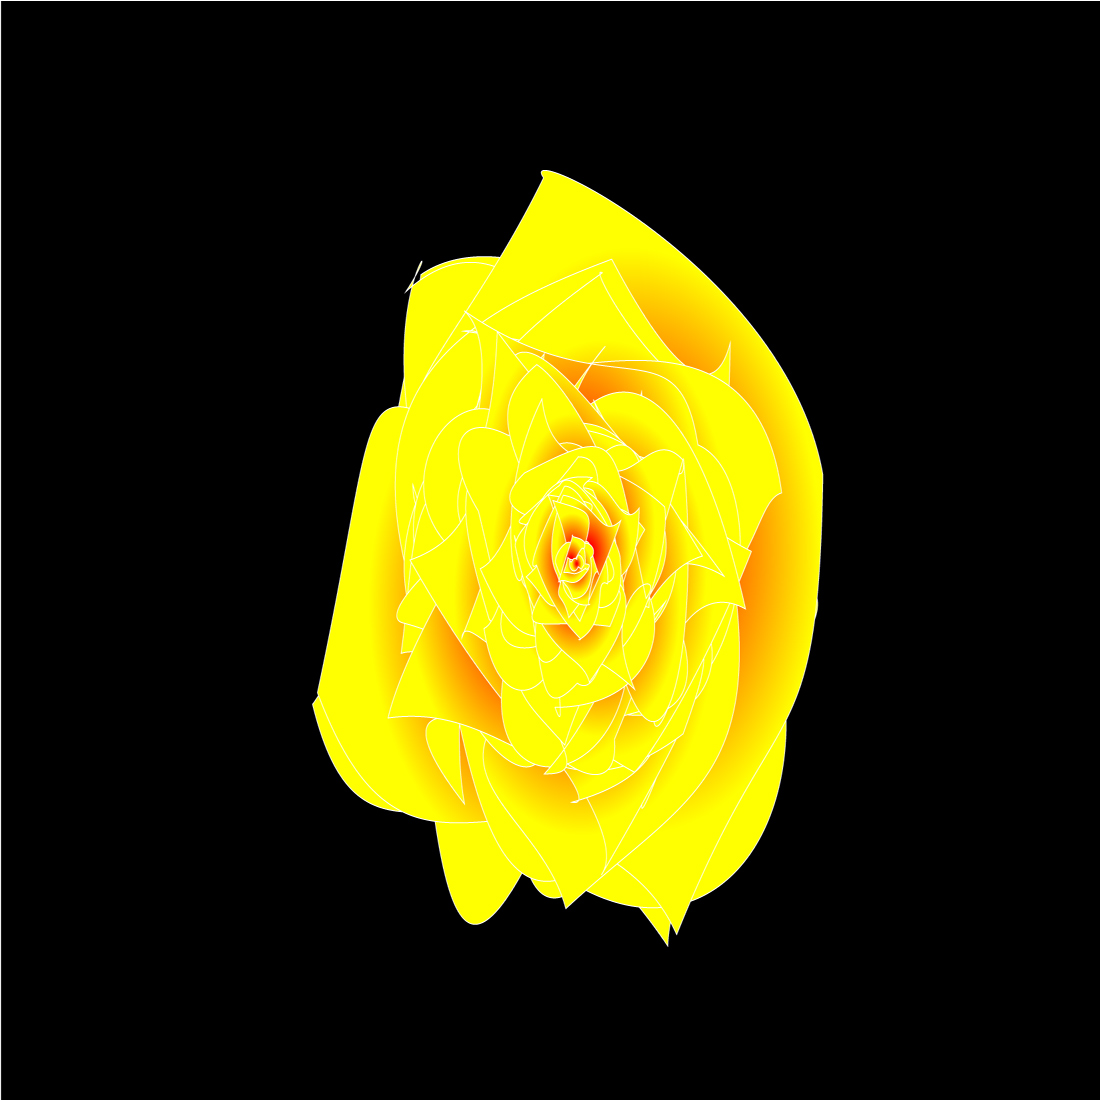 gradient background with yellow rose flower1 401